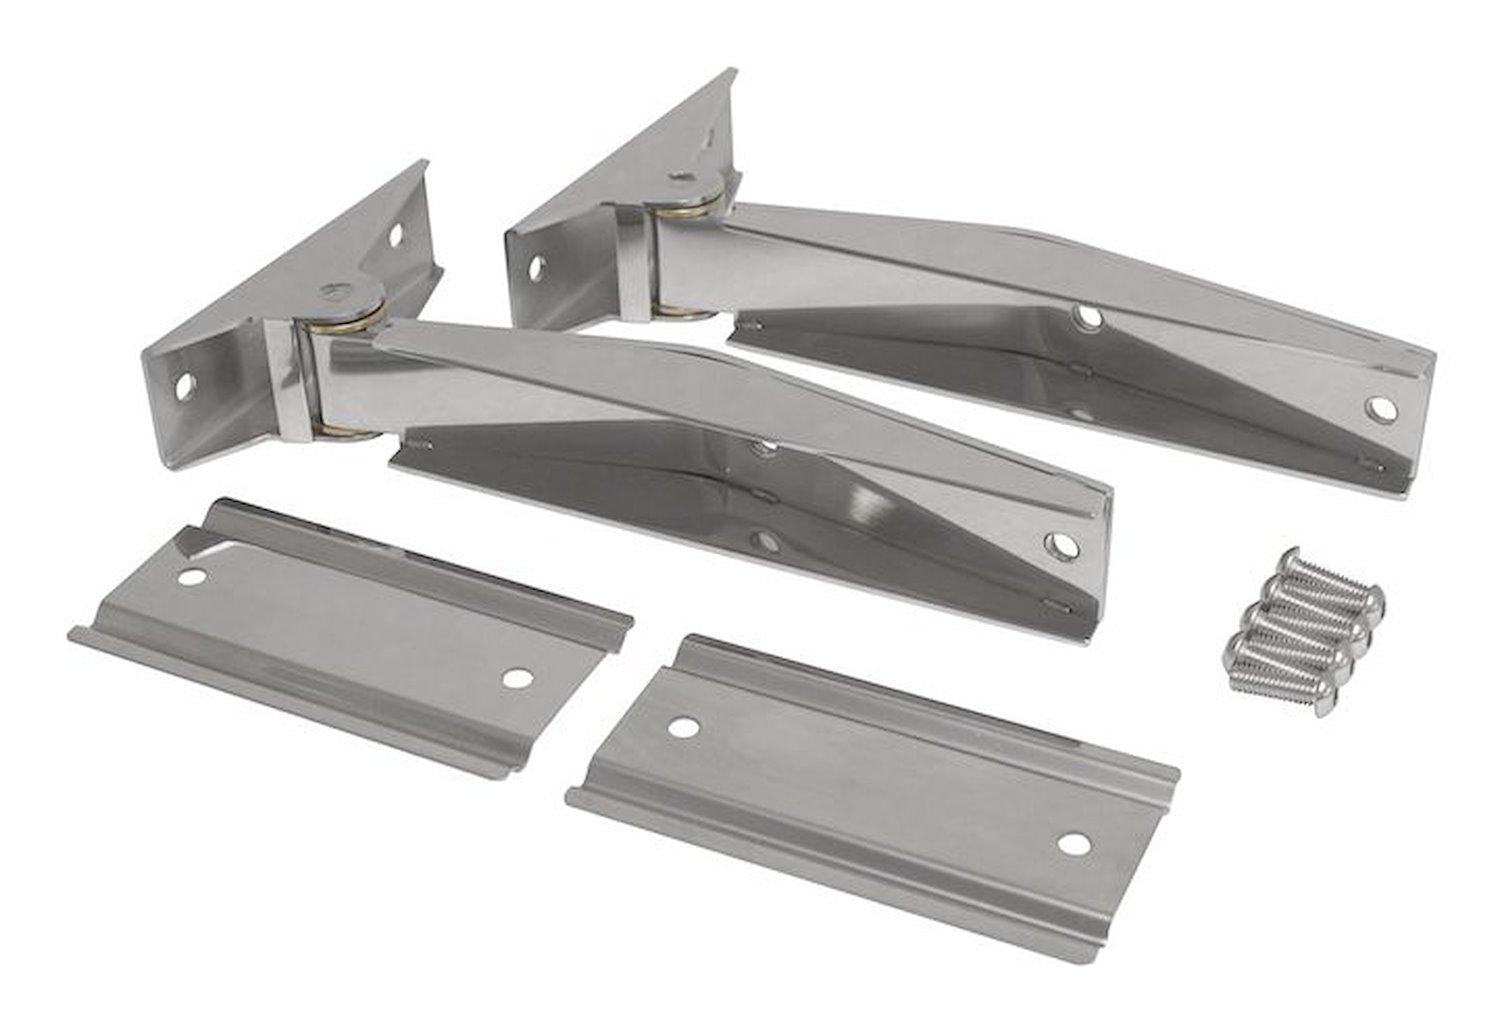 RT34065 Stainless Steel Tailgate Hinge Set for 1997-2006 Jeep TJ Wrangler; Includes 2 Hinges & Hardware